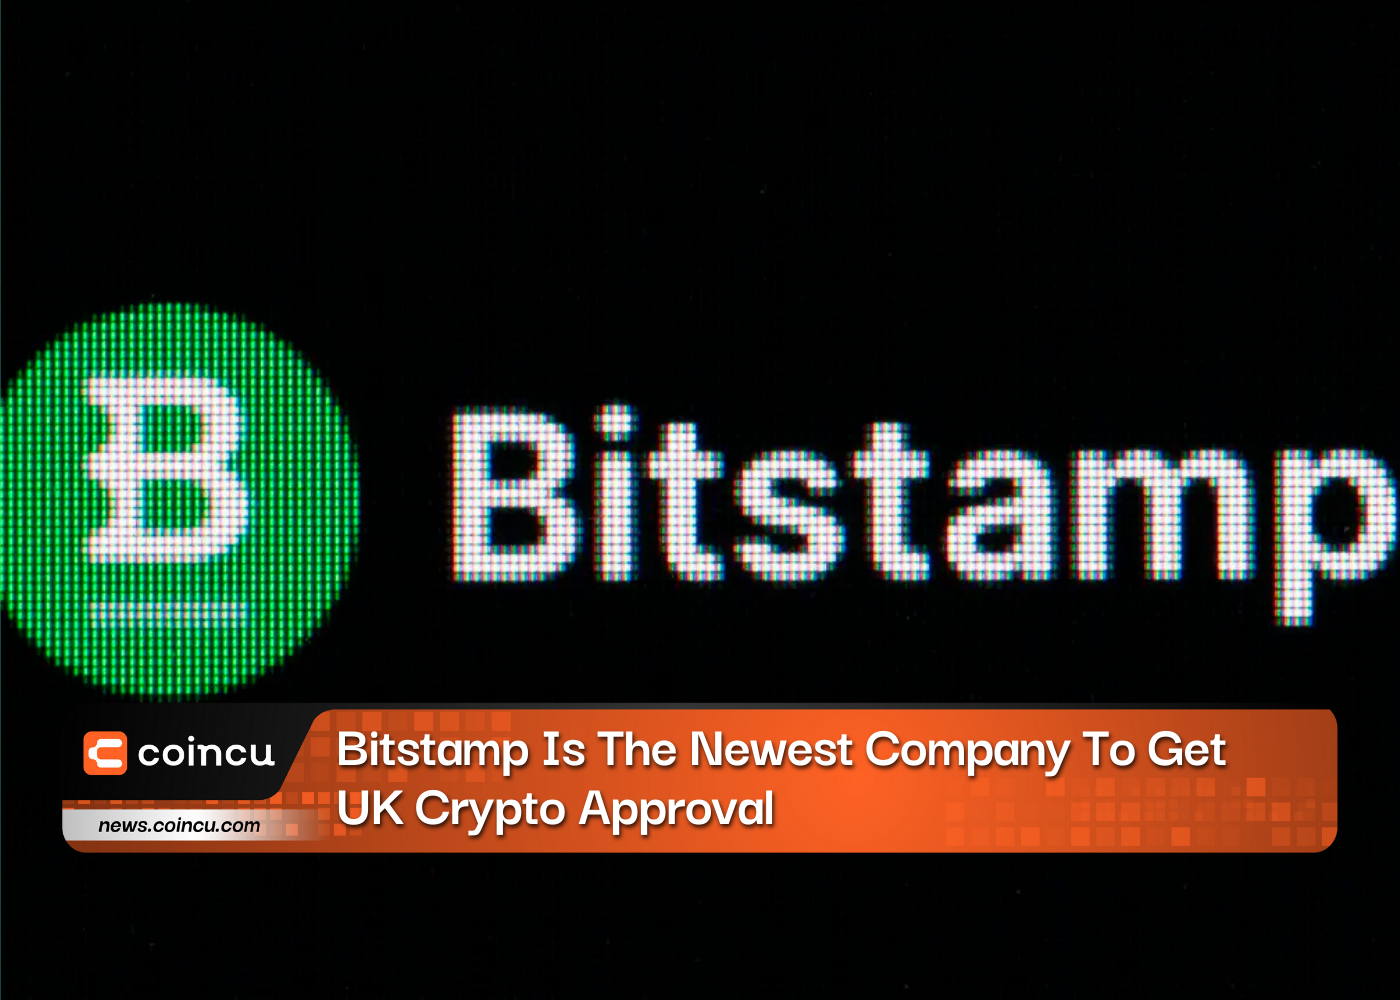 Bitstamp Is The Newest Company To Get UK Crypto Approval As FCA First Additions In 6 Months